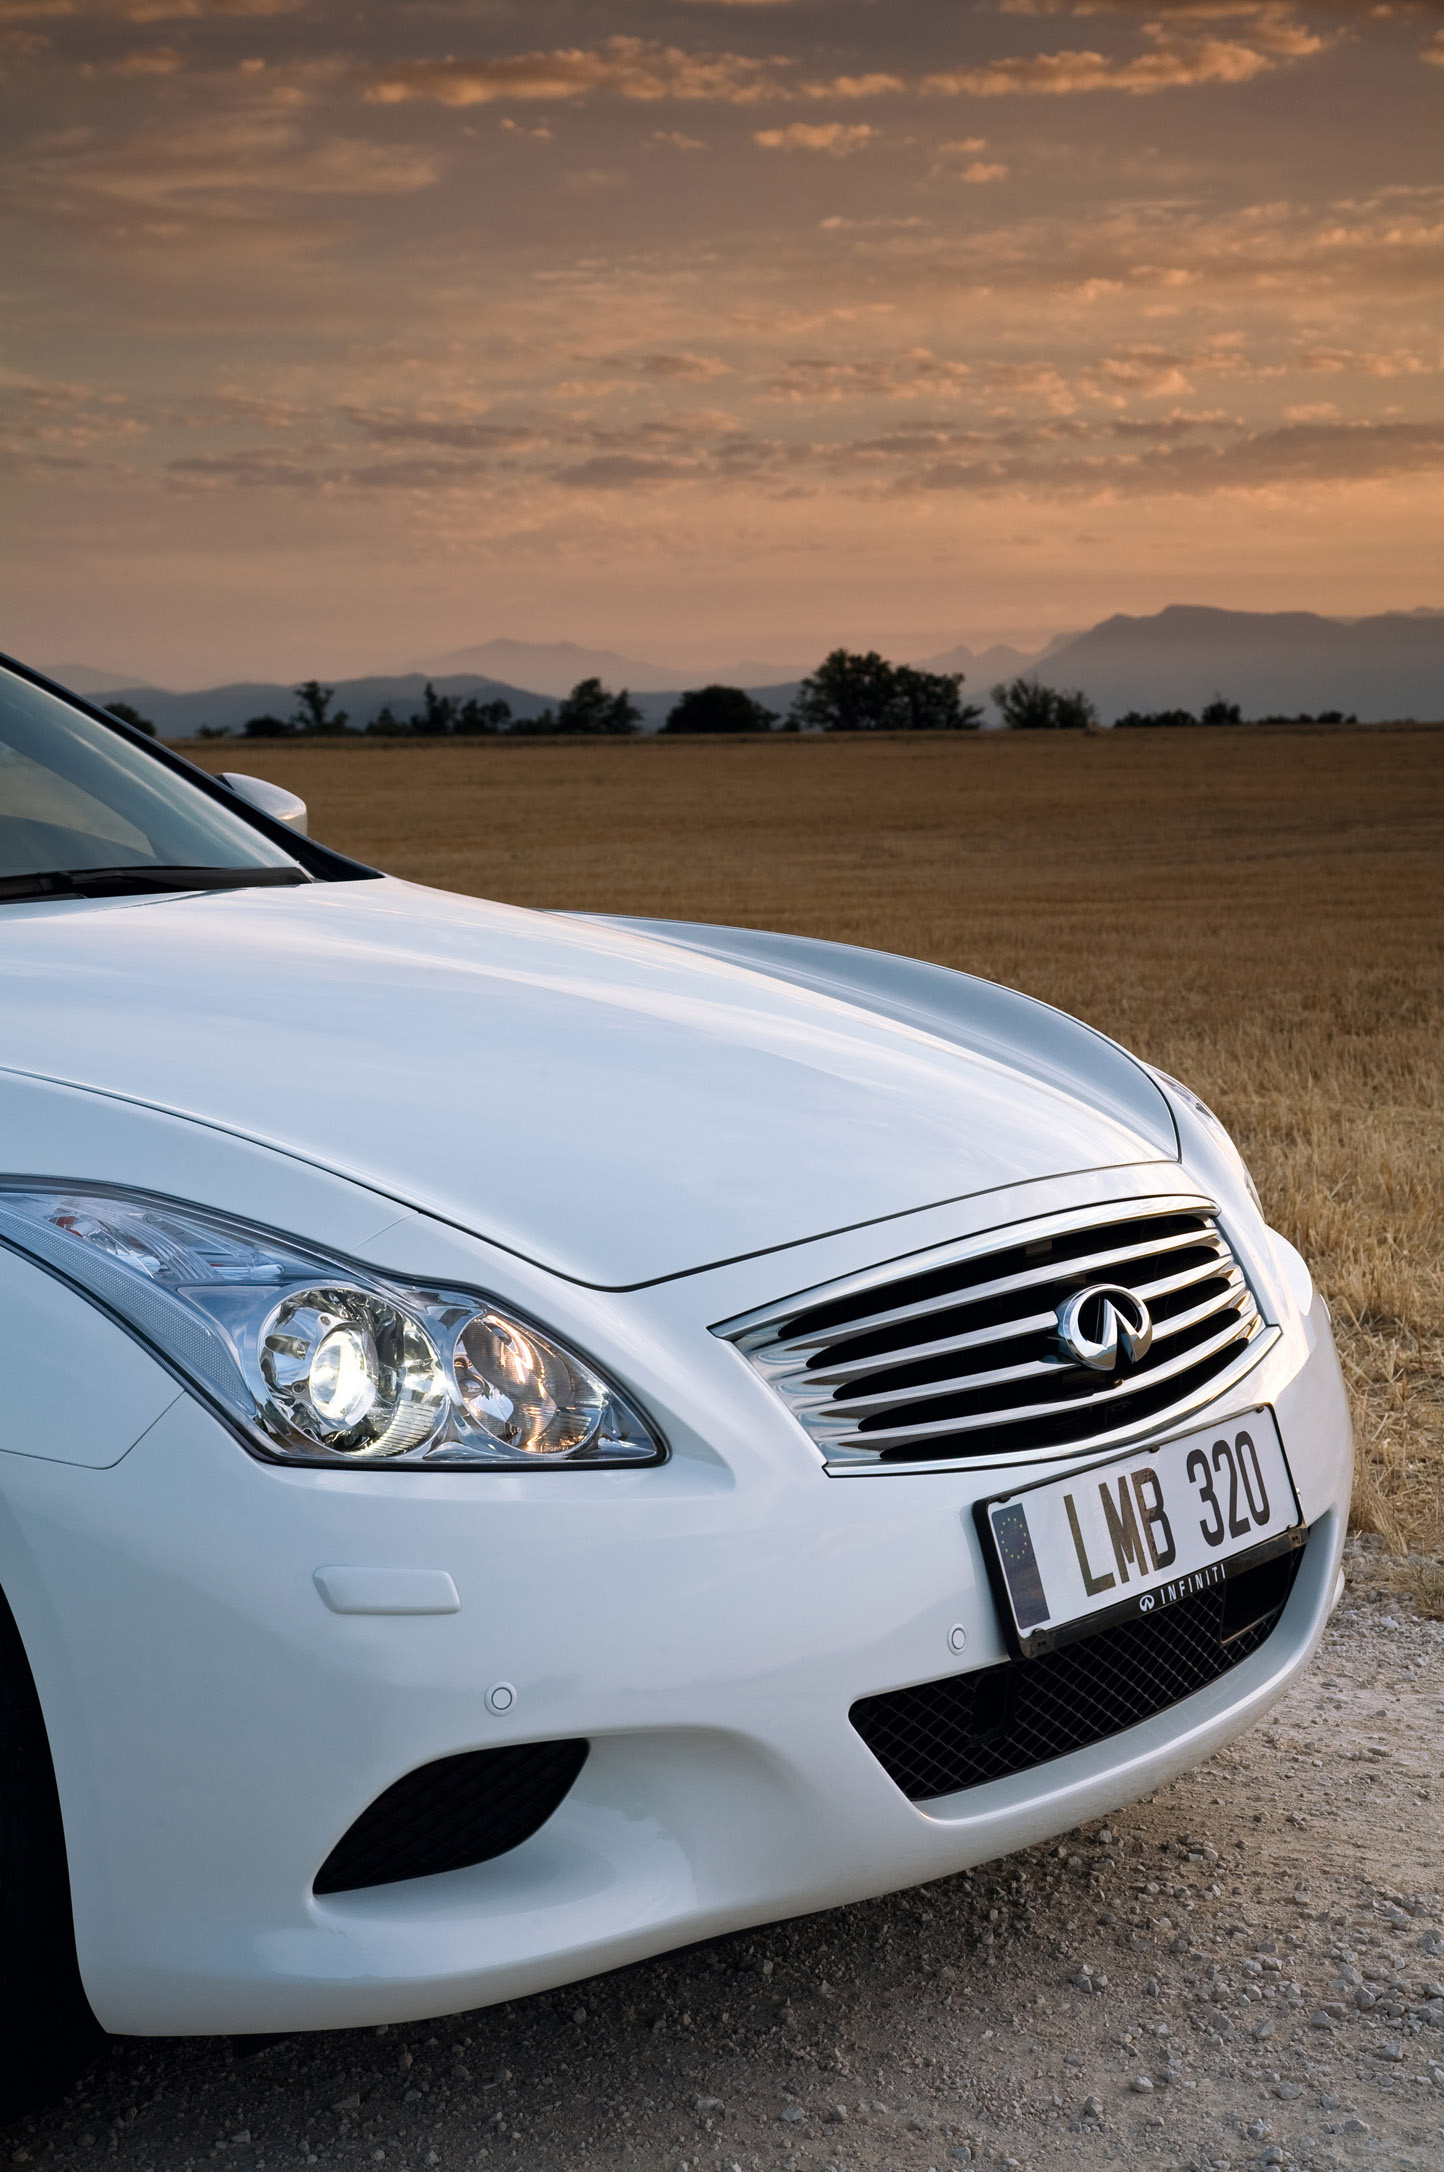 Infiniti G37 luxury car, G37 coupe 2009, High-definition image, Automotive excellence, 1450x2180 HD Handy